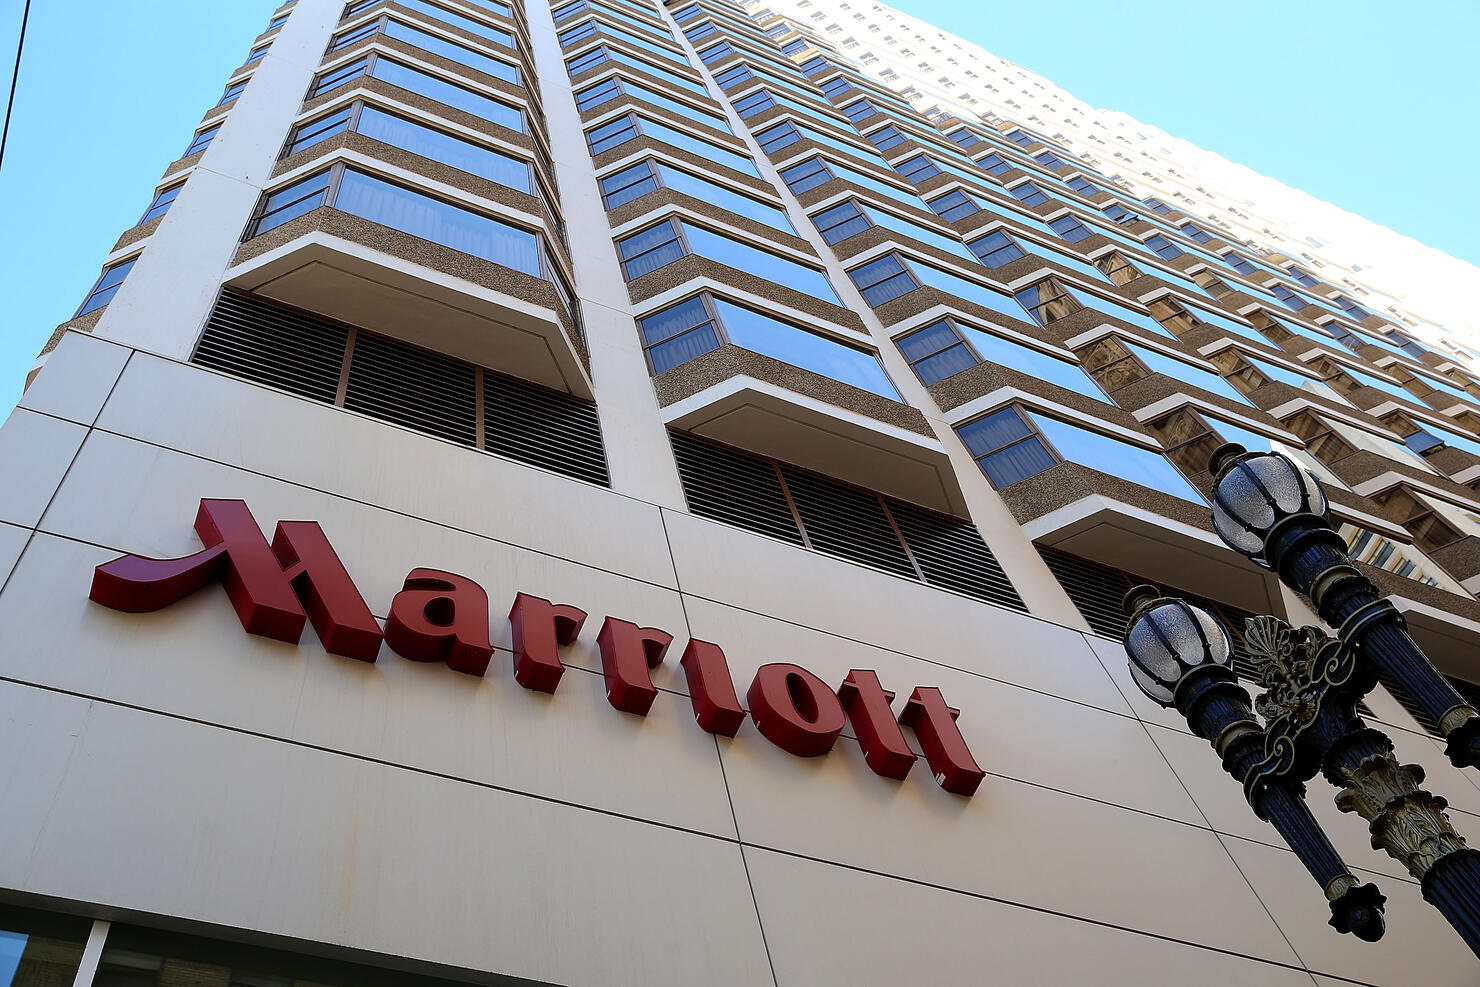 Marriott hotels says up to 500 million guests information accessed by hackers 